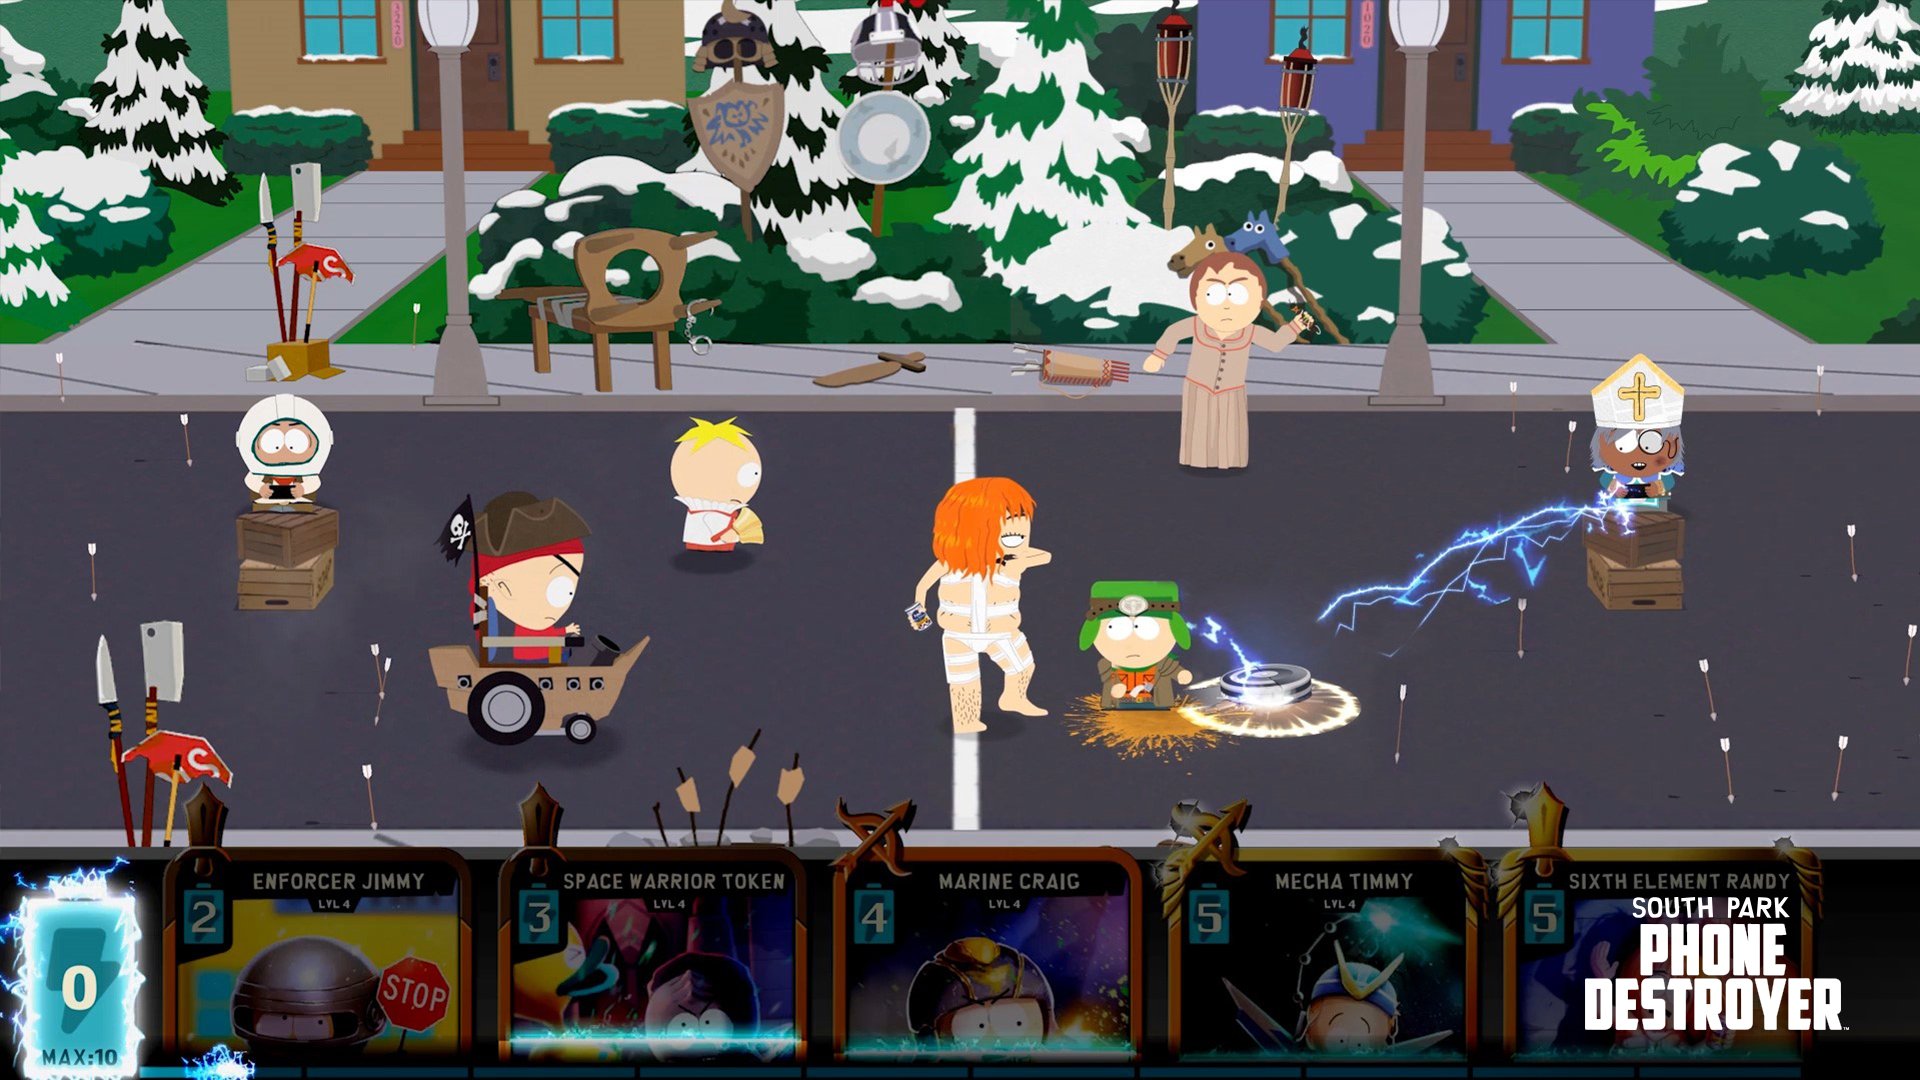 South Park: Phone Destroyer (Video Game 2017)